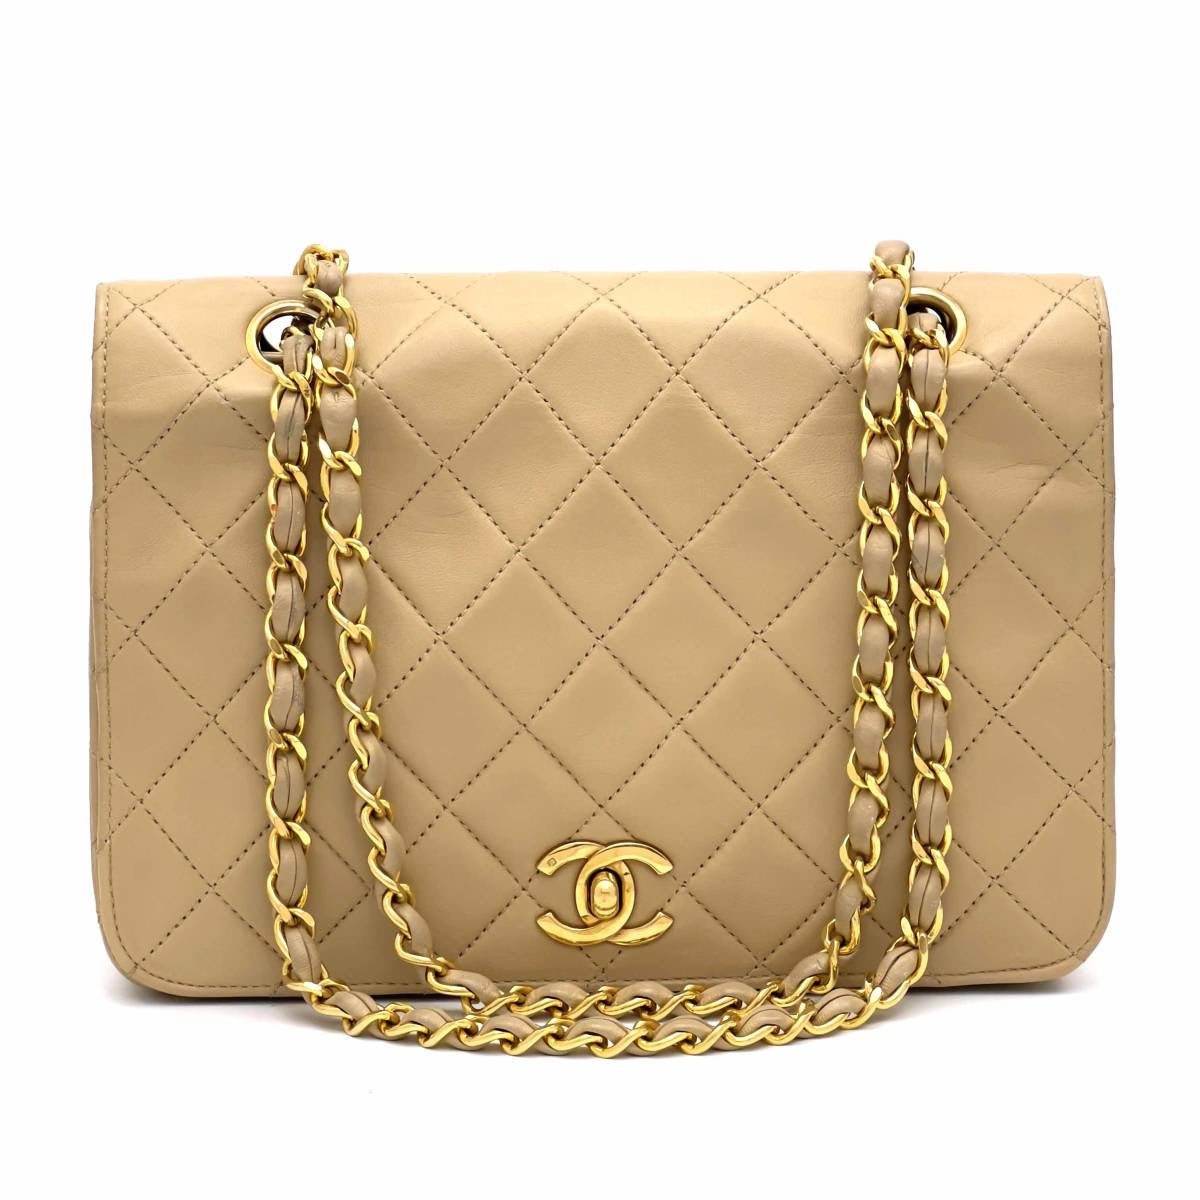 Stunning Haute Couture CHANEL COCO Vintage Gold Tone 